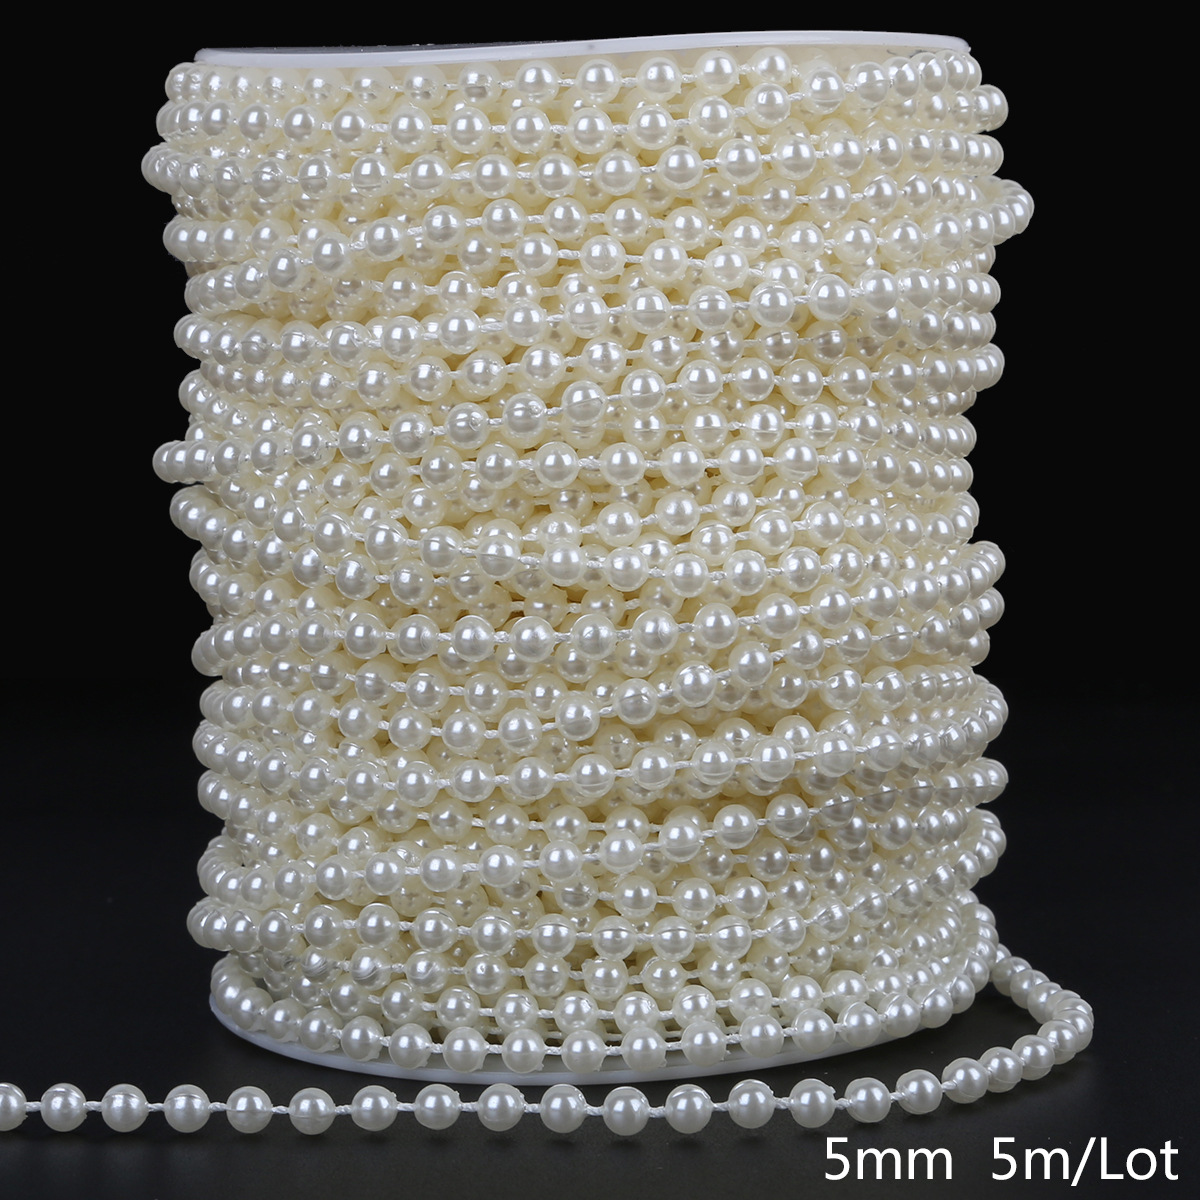 3:Round, 5mm 5m/pack/ about 53g